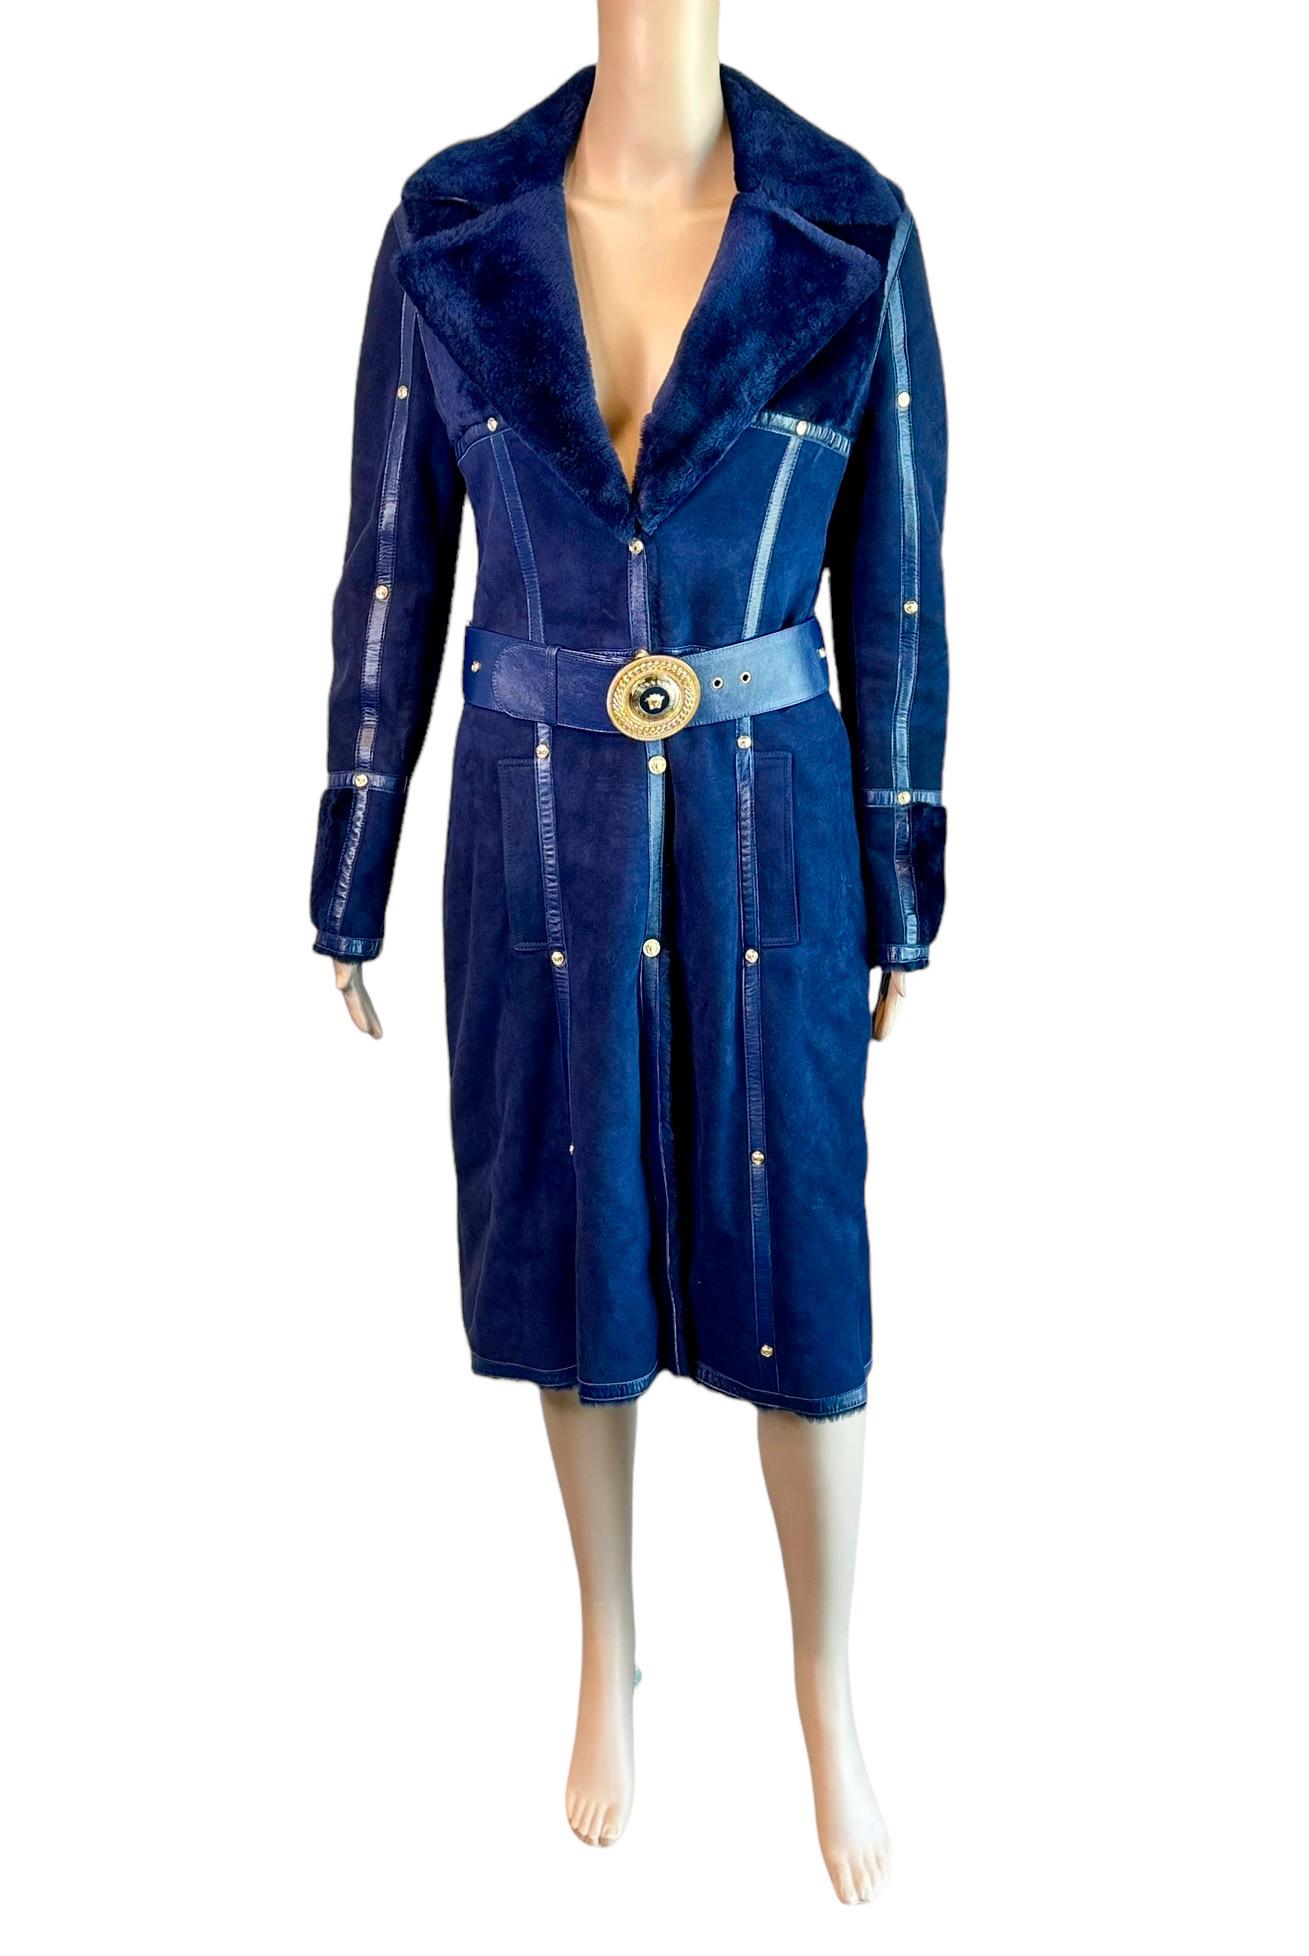 Versace F/W 2011 Shearling Leather Medusa Logo Belted Knee-Length Jacket Coat In Good Condition For Sale In Naples, FL